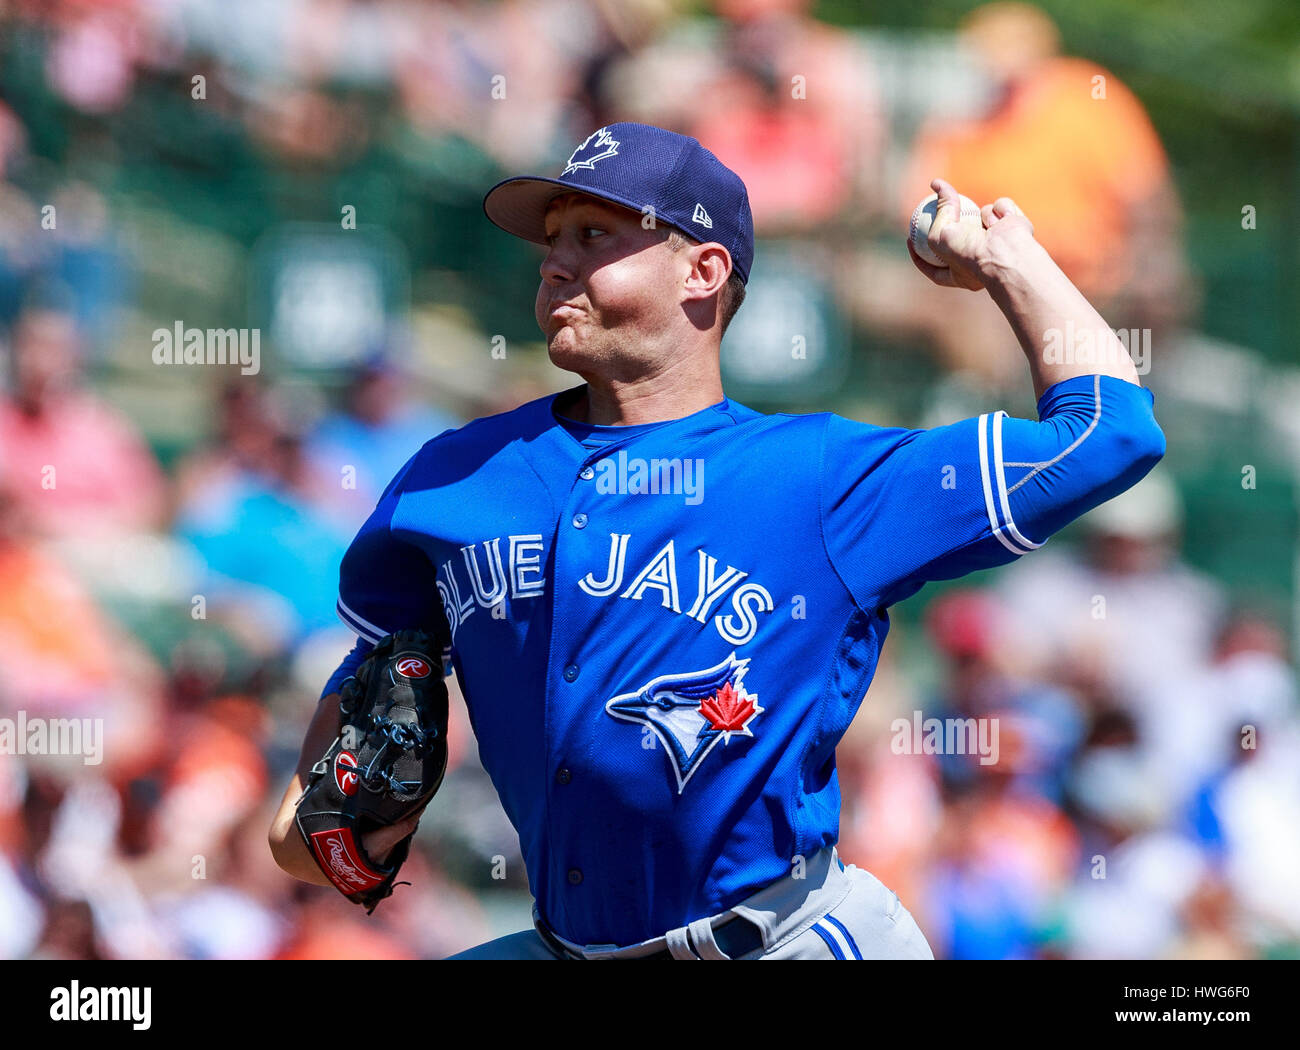 Ed Smith Stadium. 21st Mar, 2017. Florida, USA-Toronto Blue Jays relief pitcher Jeff Beliveau (36) relieves Baltimore Orioles starting pitcher Logan Verrett (41) in the 4th inning in a spring training game at Ed Smith Stadium. Del Mecum/CSM/Alamy Live News Stock Photo